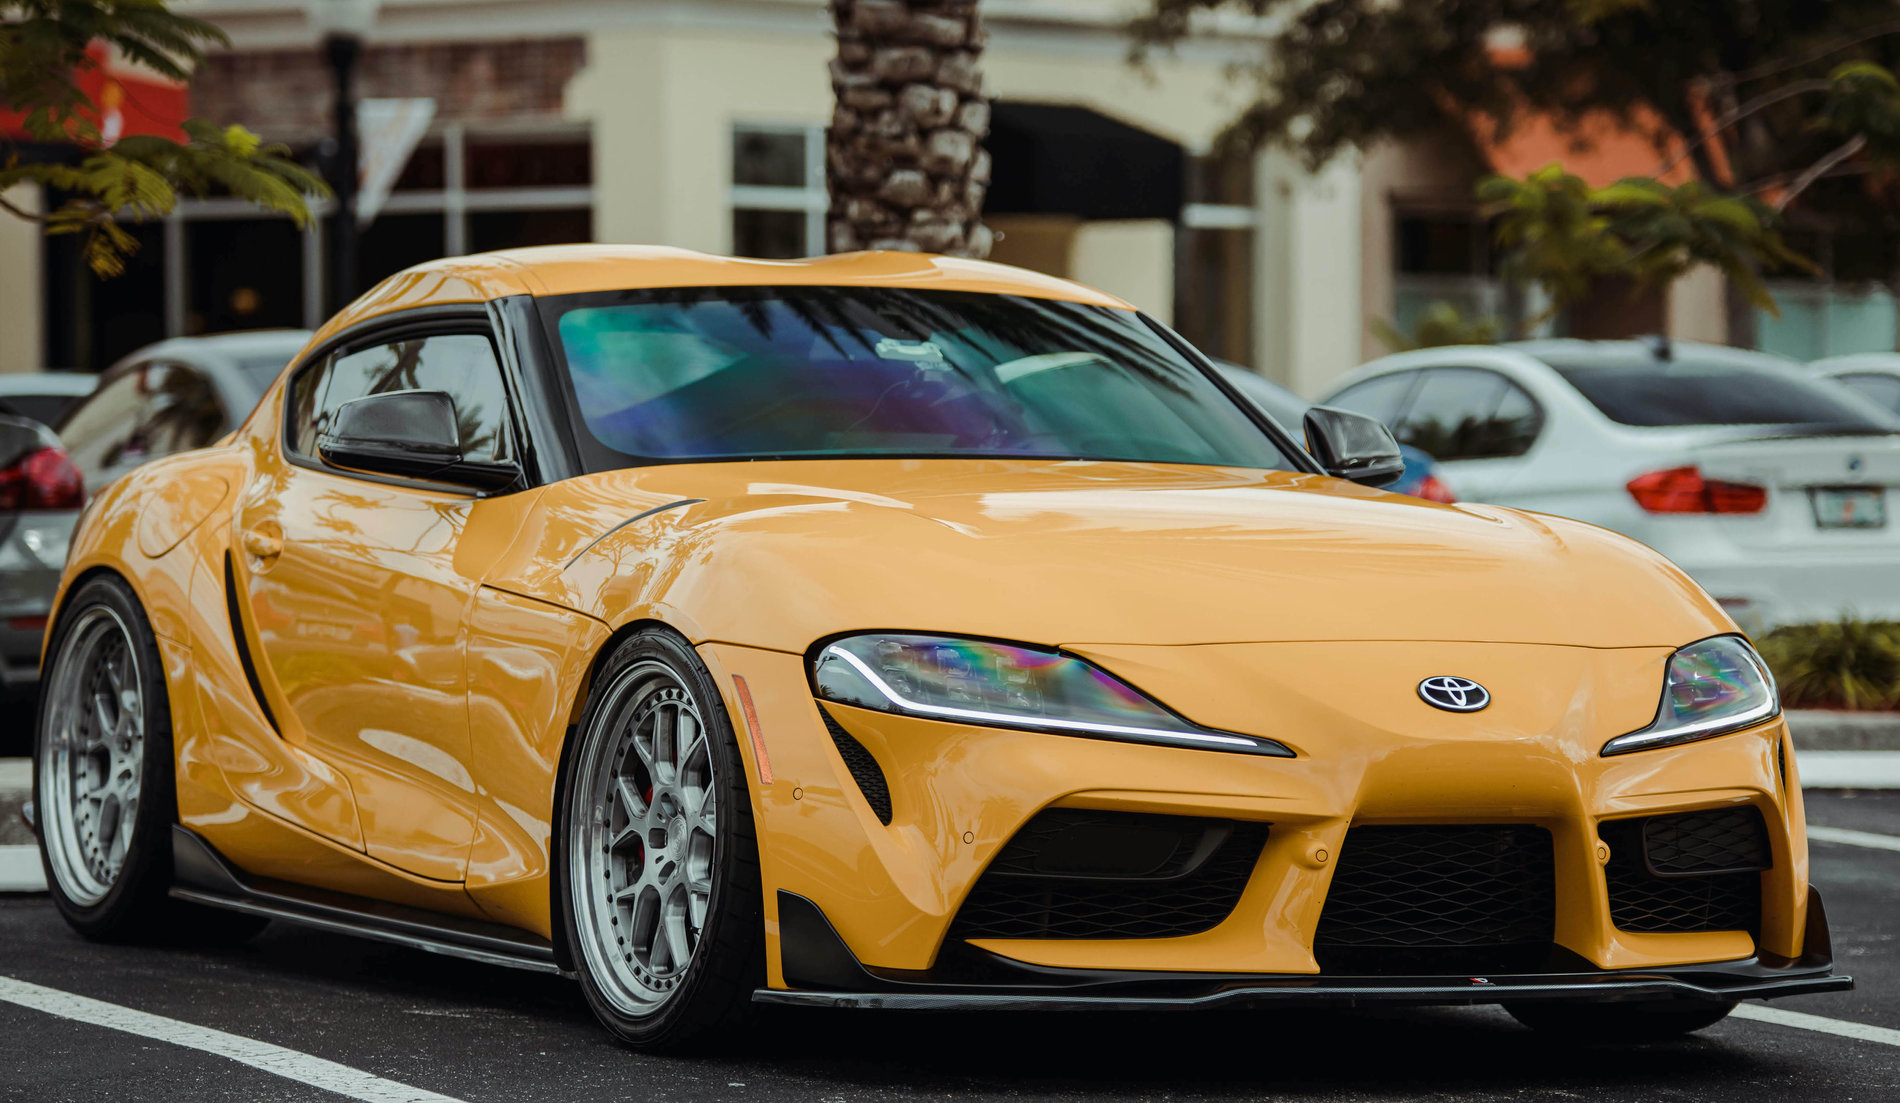 Pics & Vids of Supra with aftermarket wheels Page 8